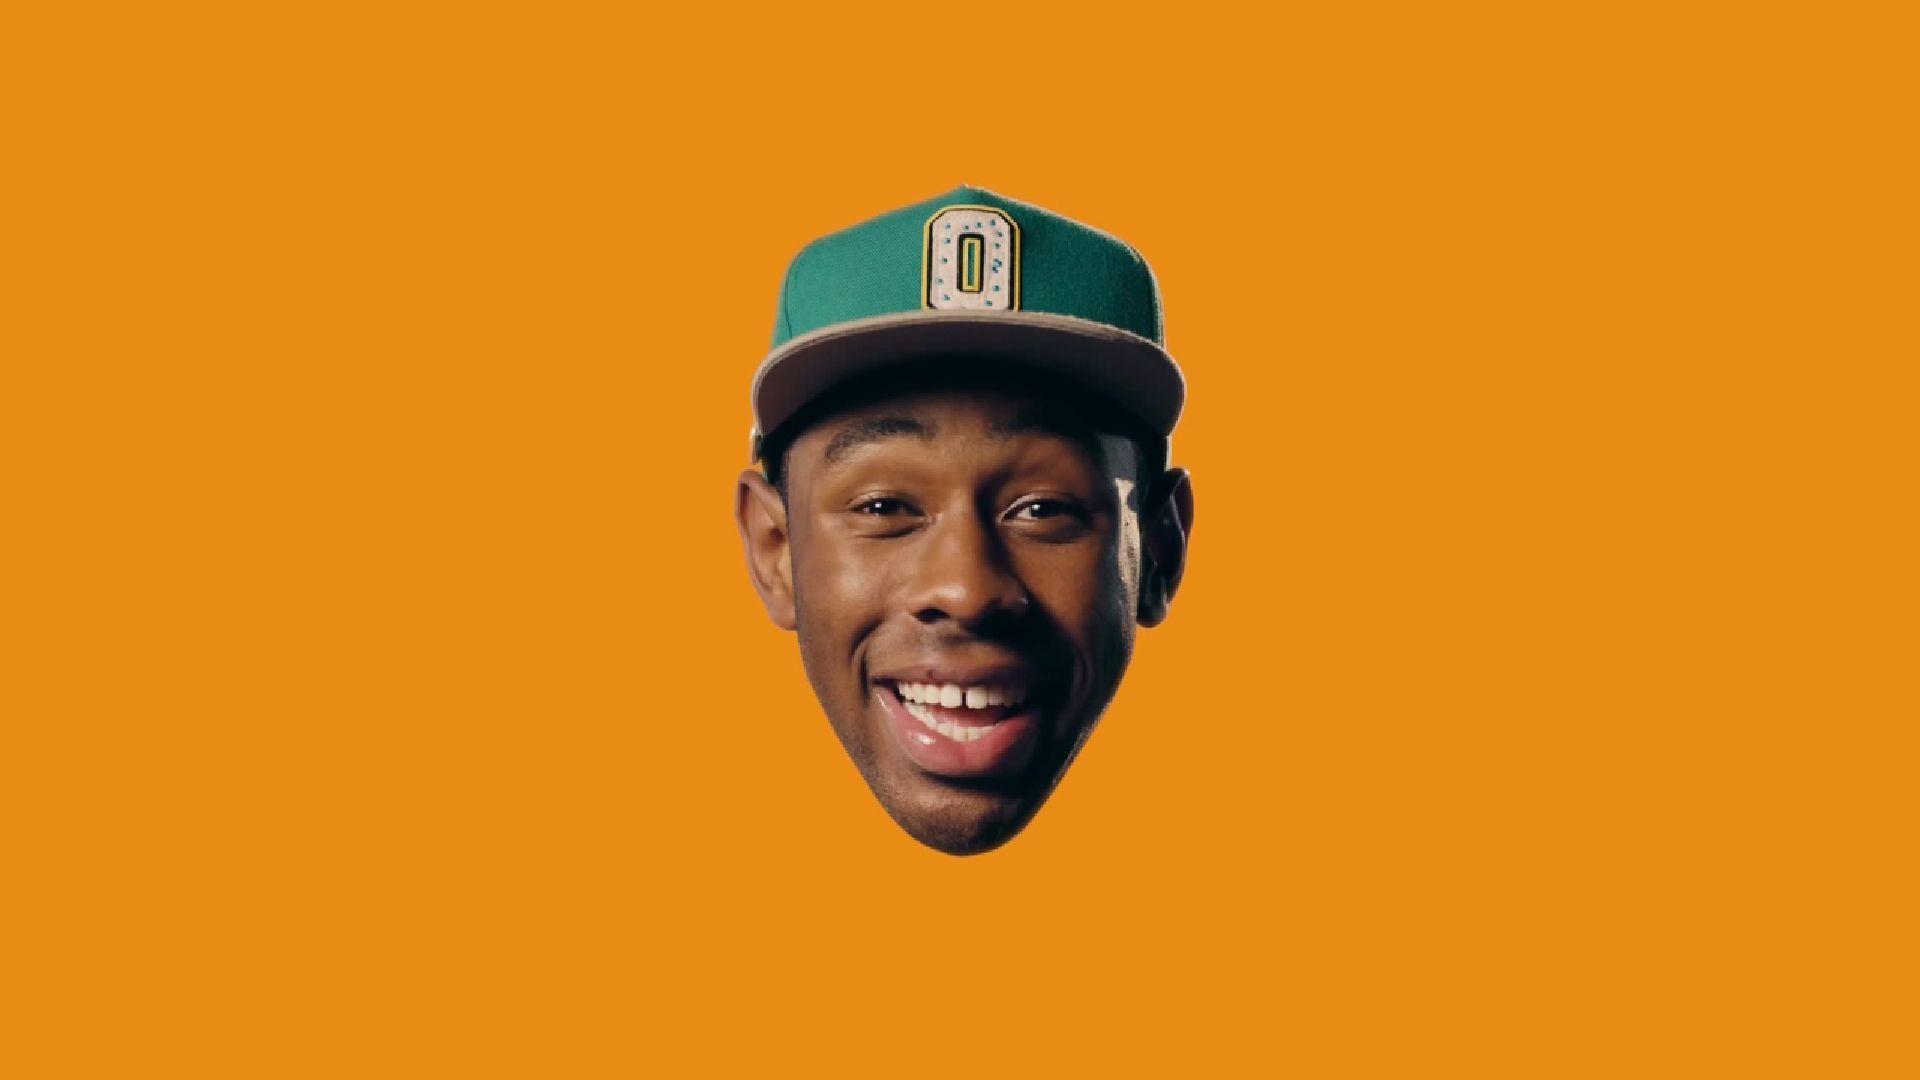 Tyler The Creator Wallpapers Top Free Tyler The Creator Images, Photos, Reviews